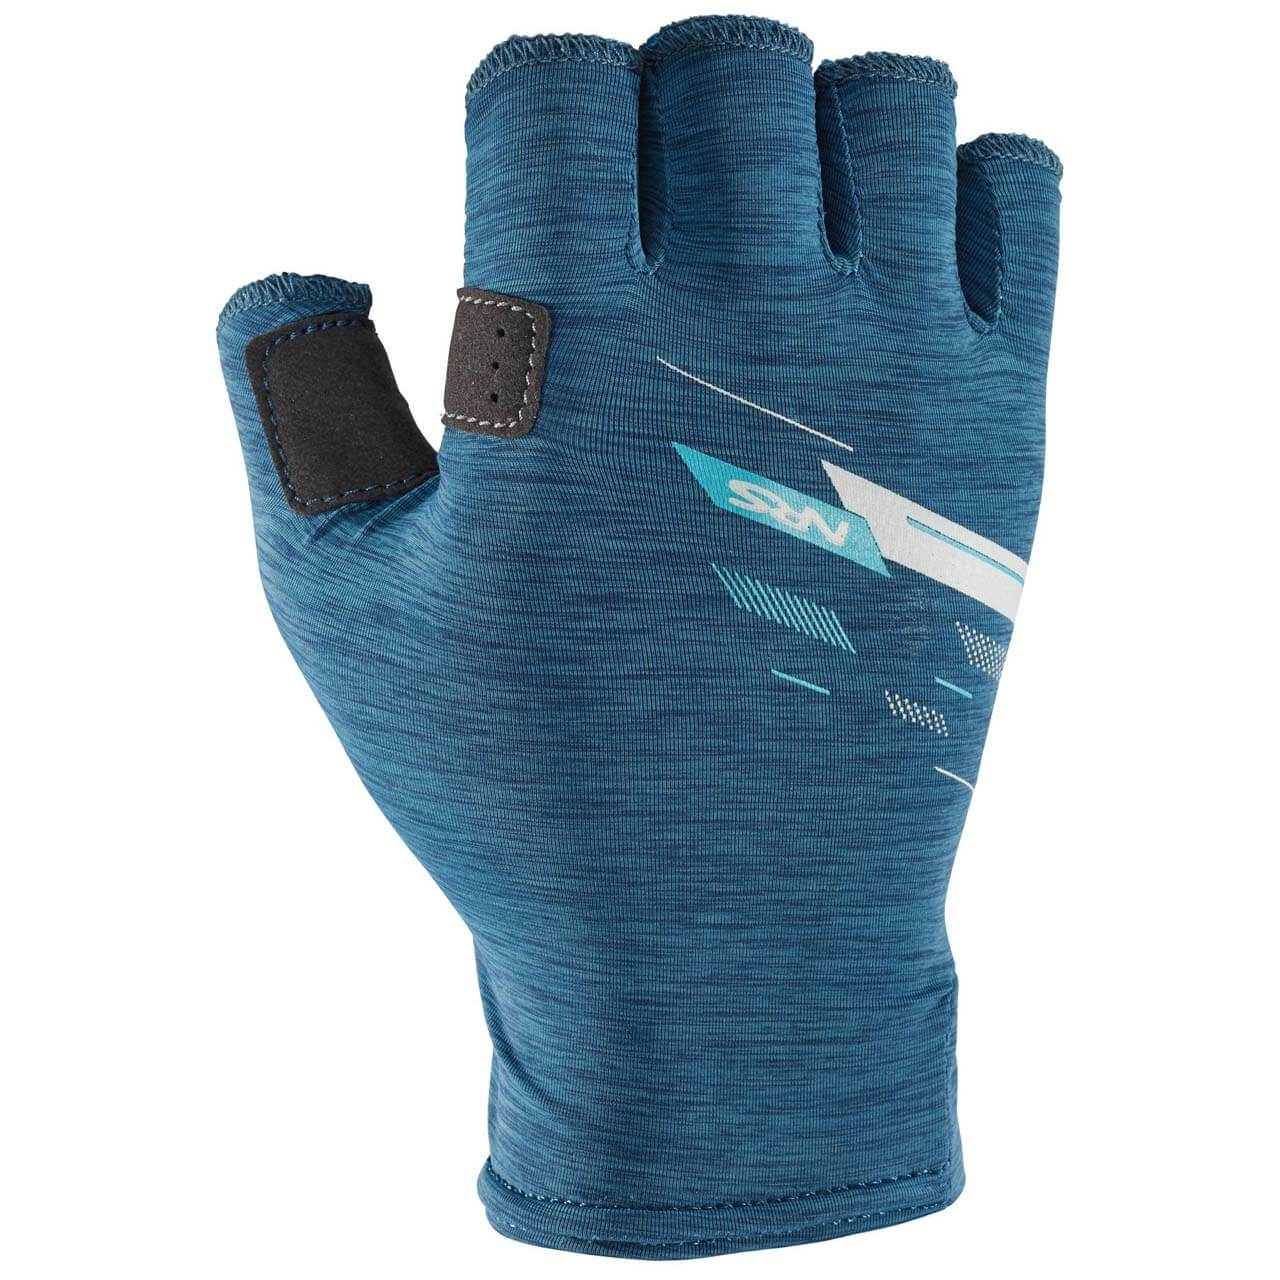 NRS Boaters Gloves - Poseidon, XL von NRS}